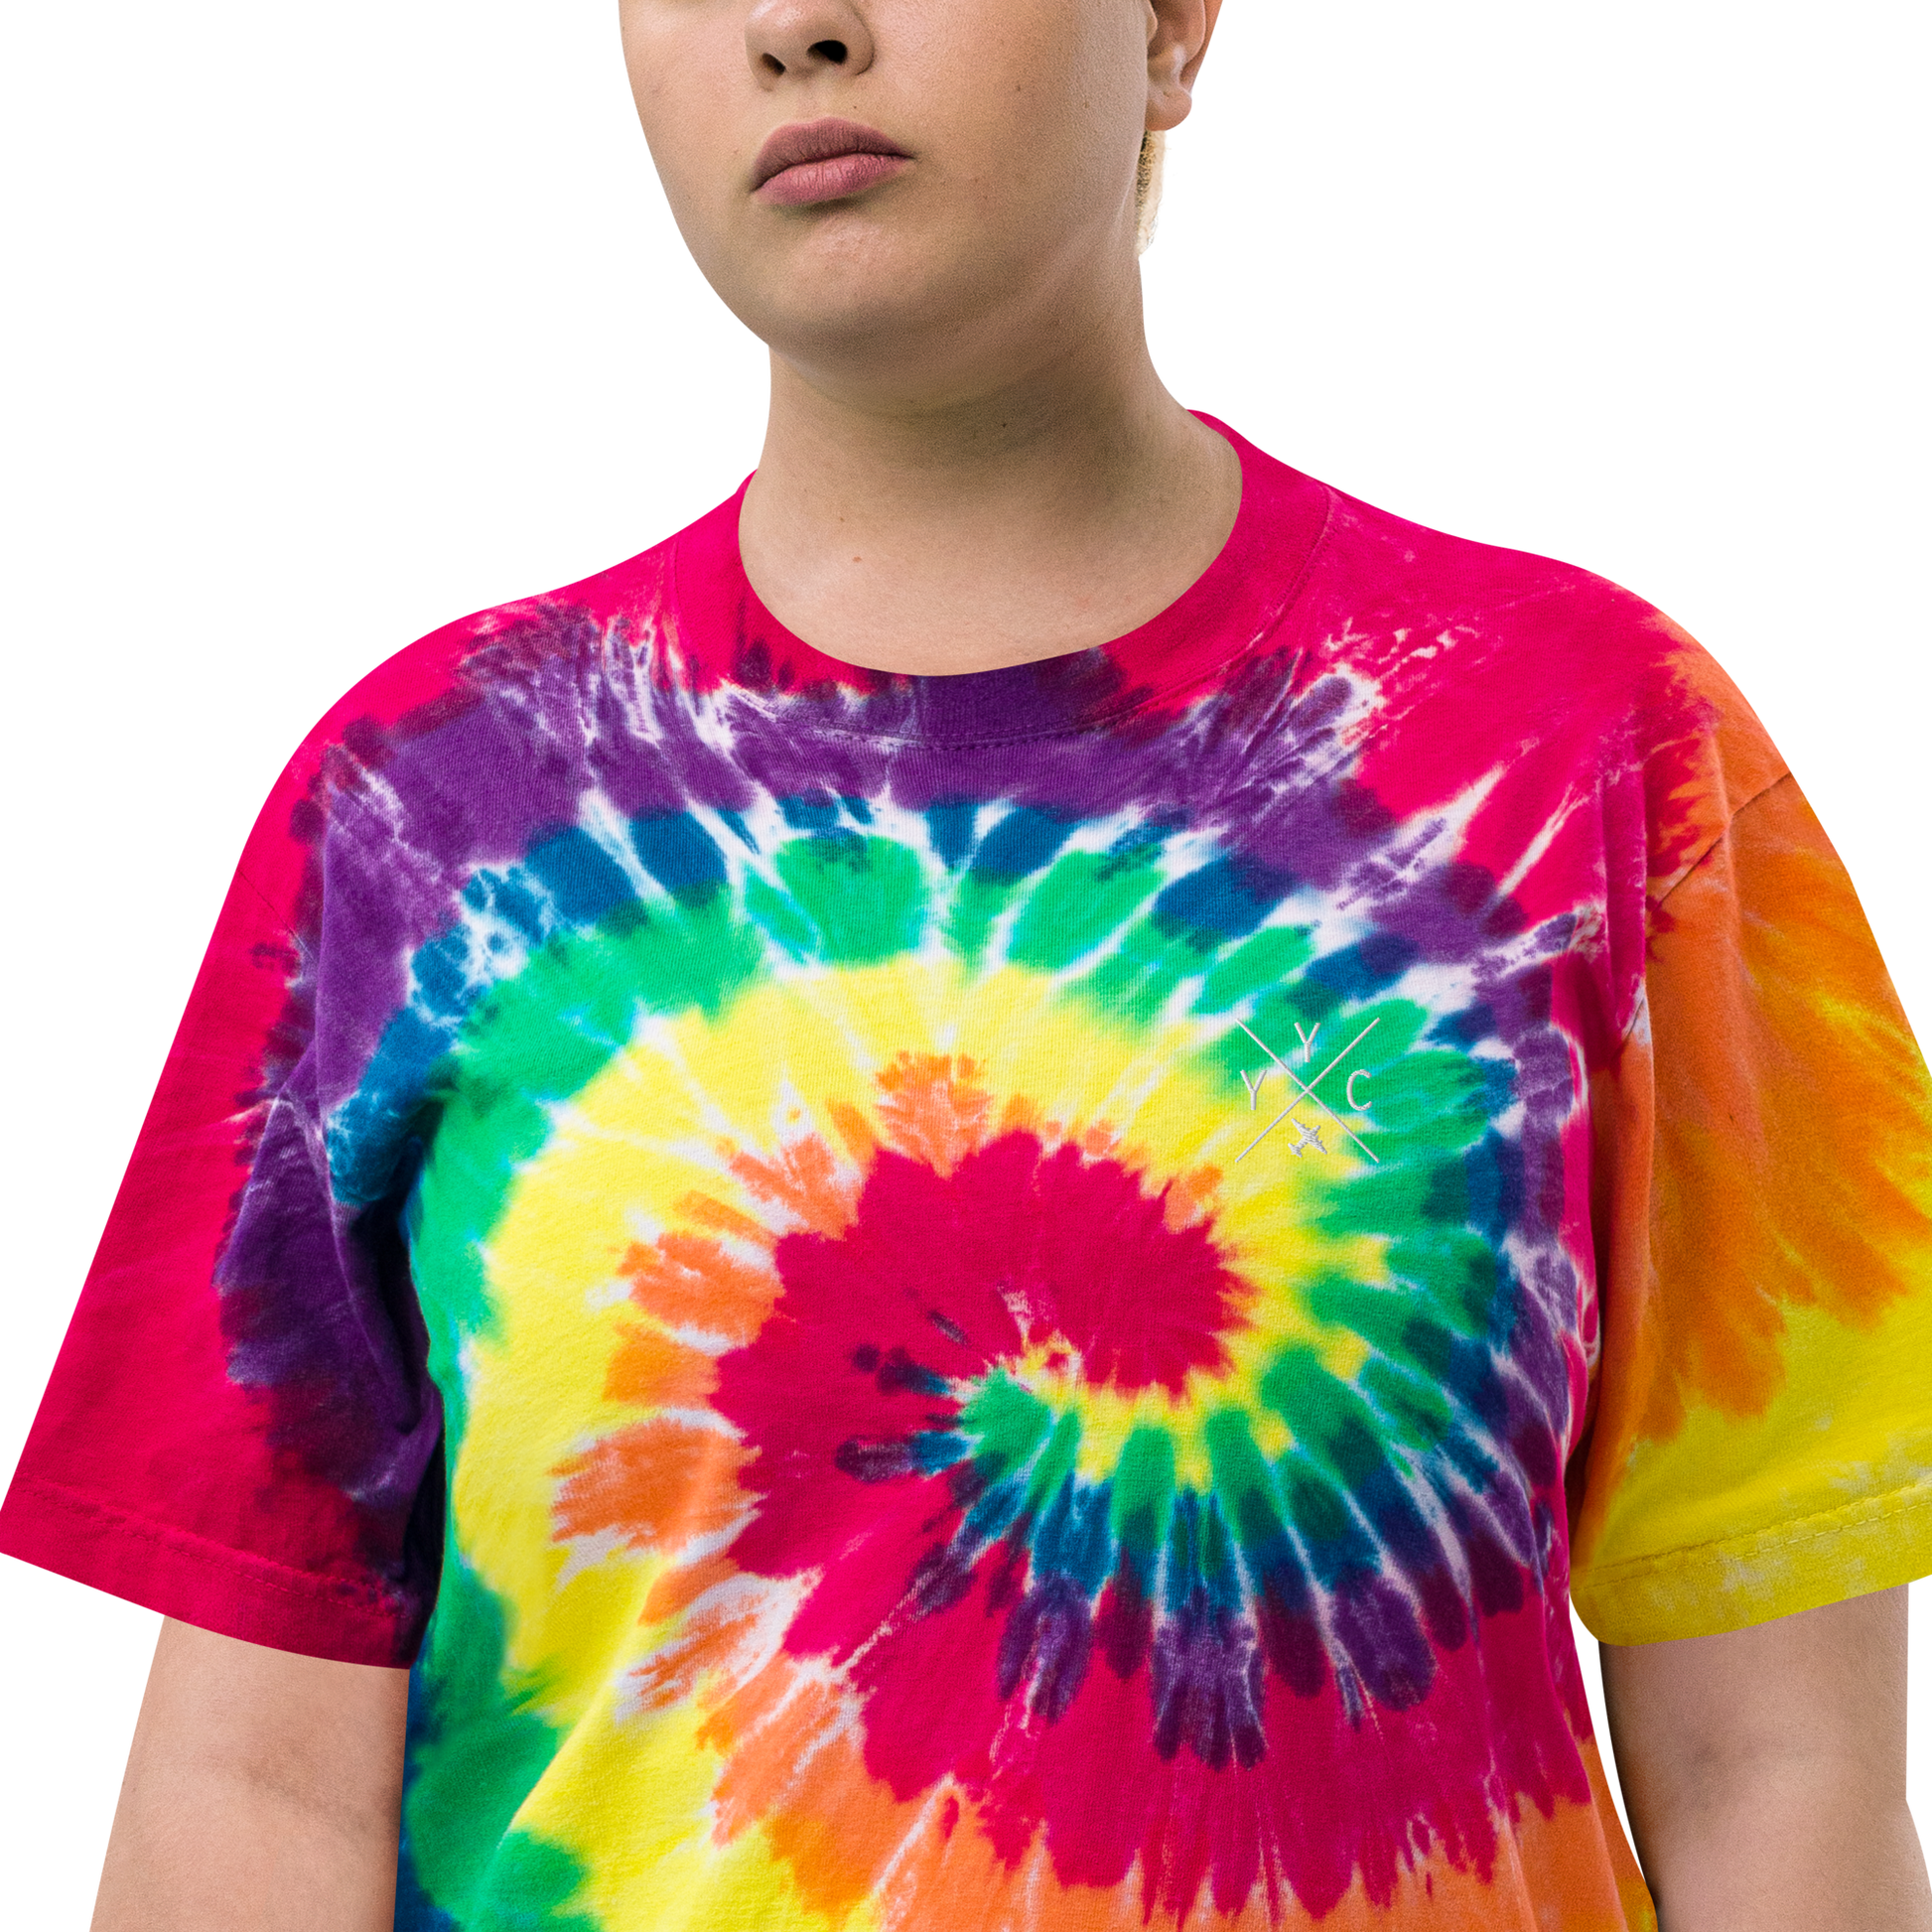 YHM Designs - YYC Calgary Oversized Tie-Dye T-Shirt - Crossed-X Design with Airport Code and Vintage Propliner - White Embroidery - Image 15